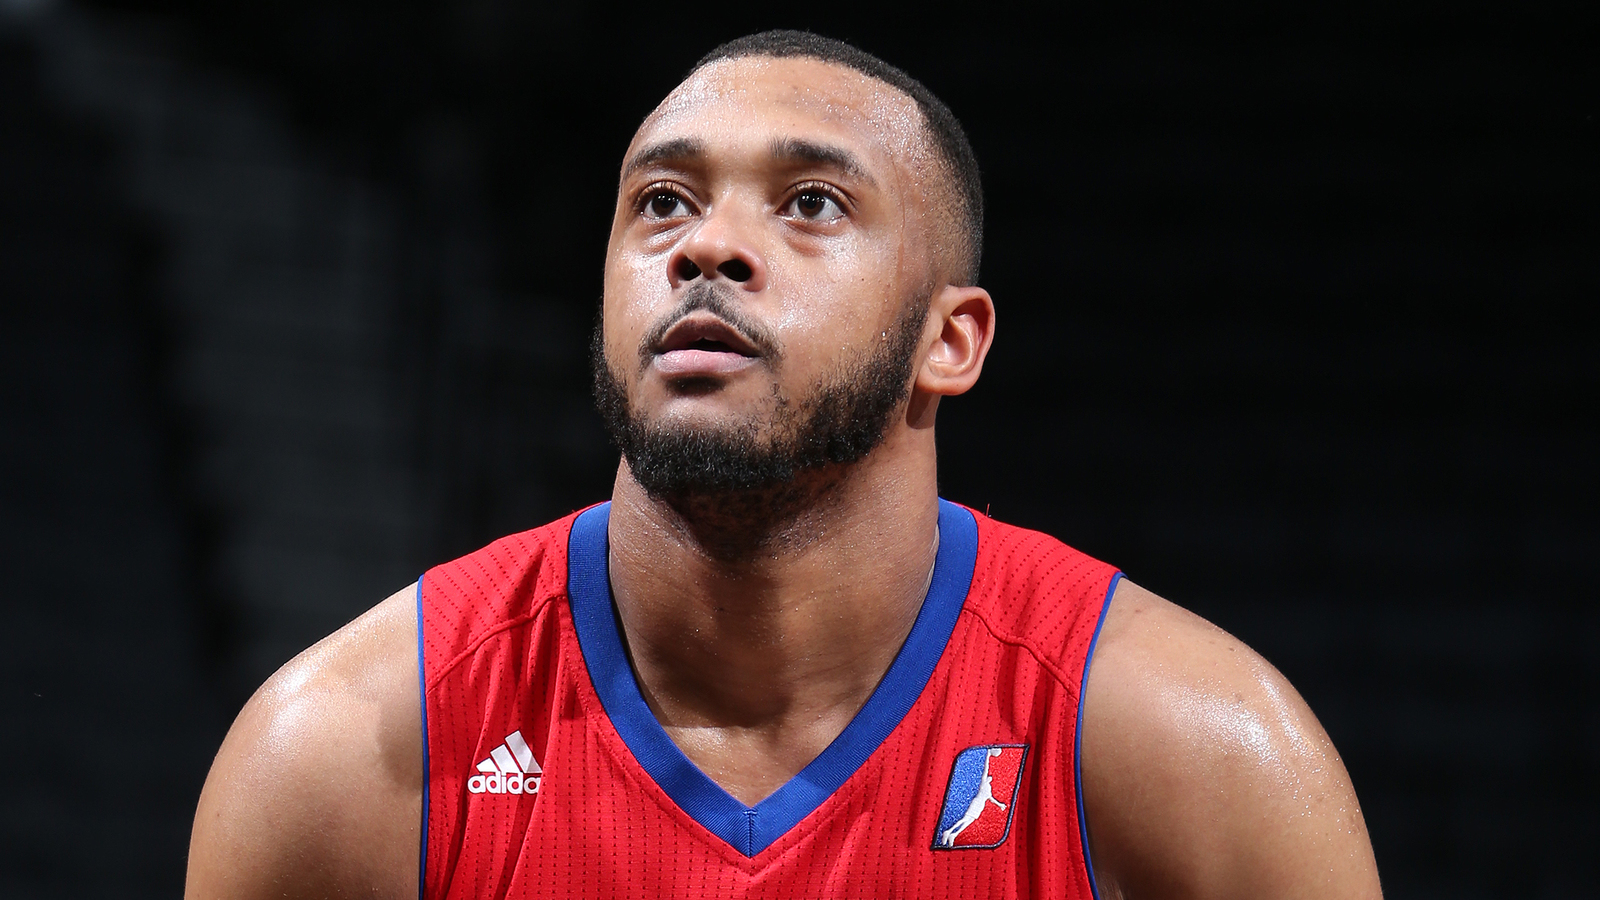 Zeke Upshaw passes away two days after on-court collapse